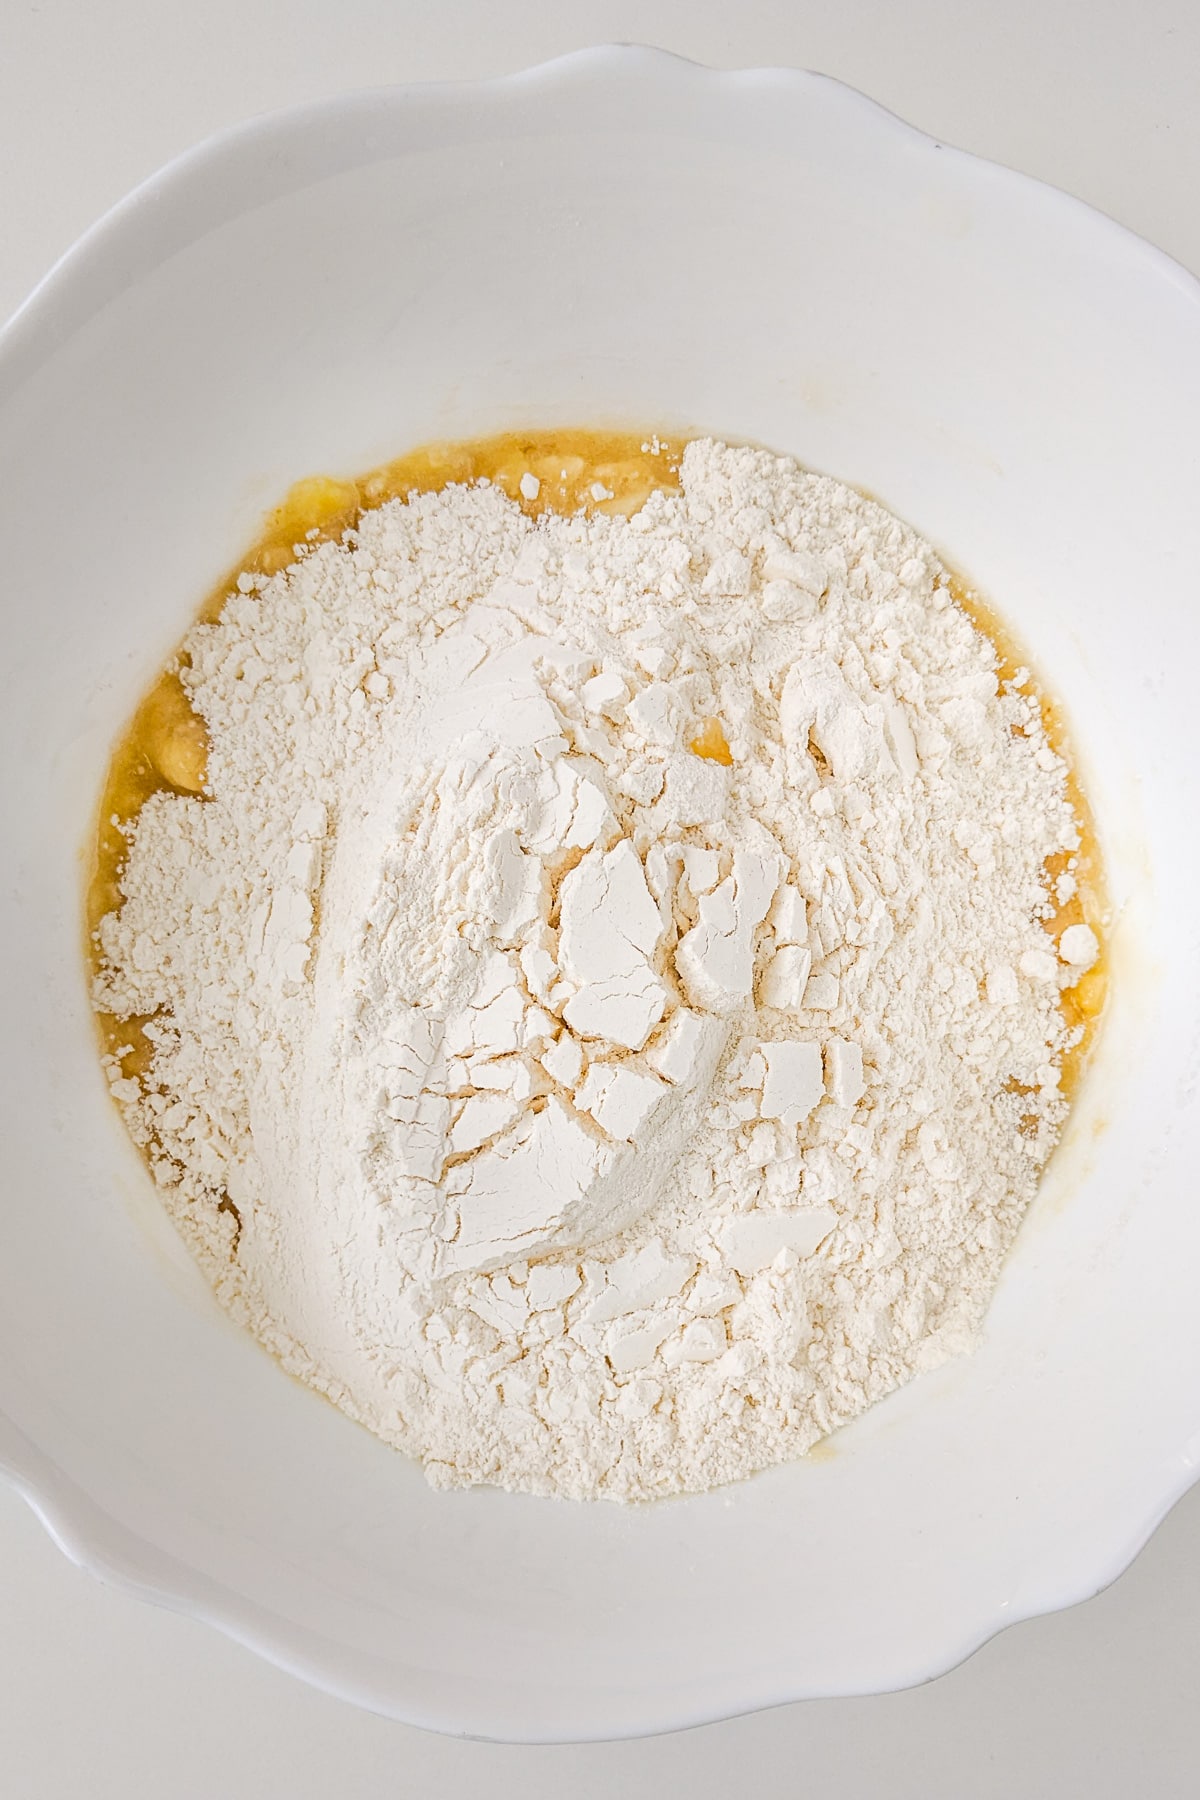 Flour over a mix of bananas and cane sugar in a white plate.